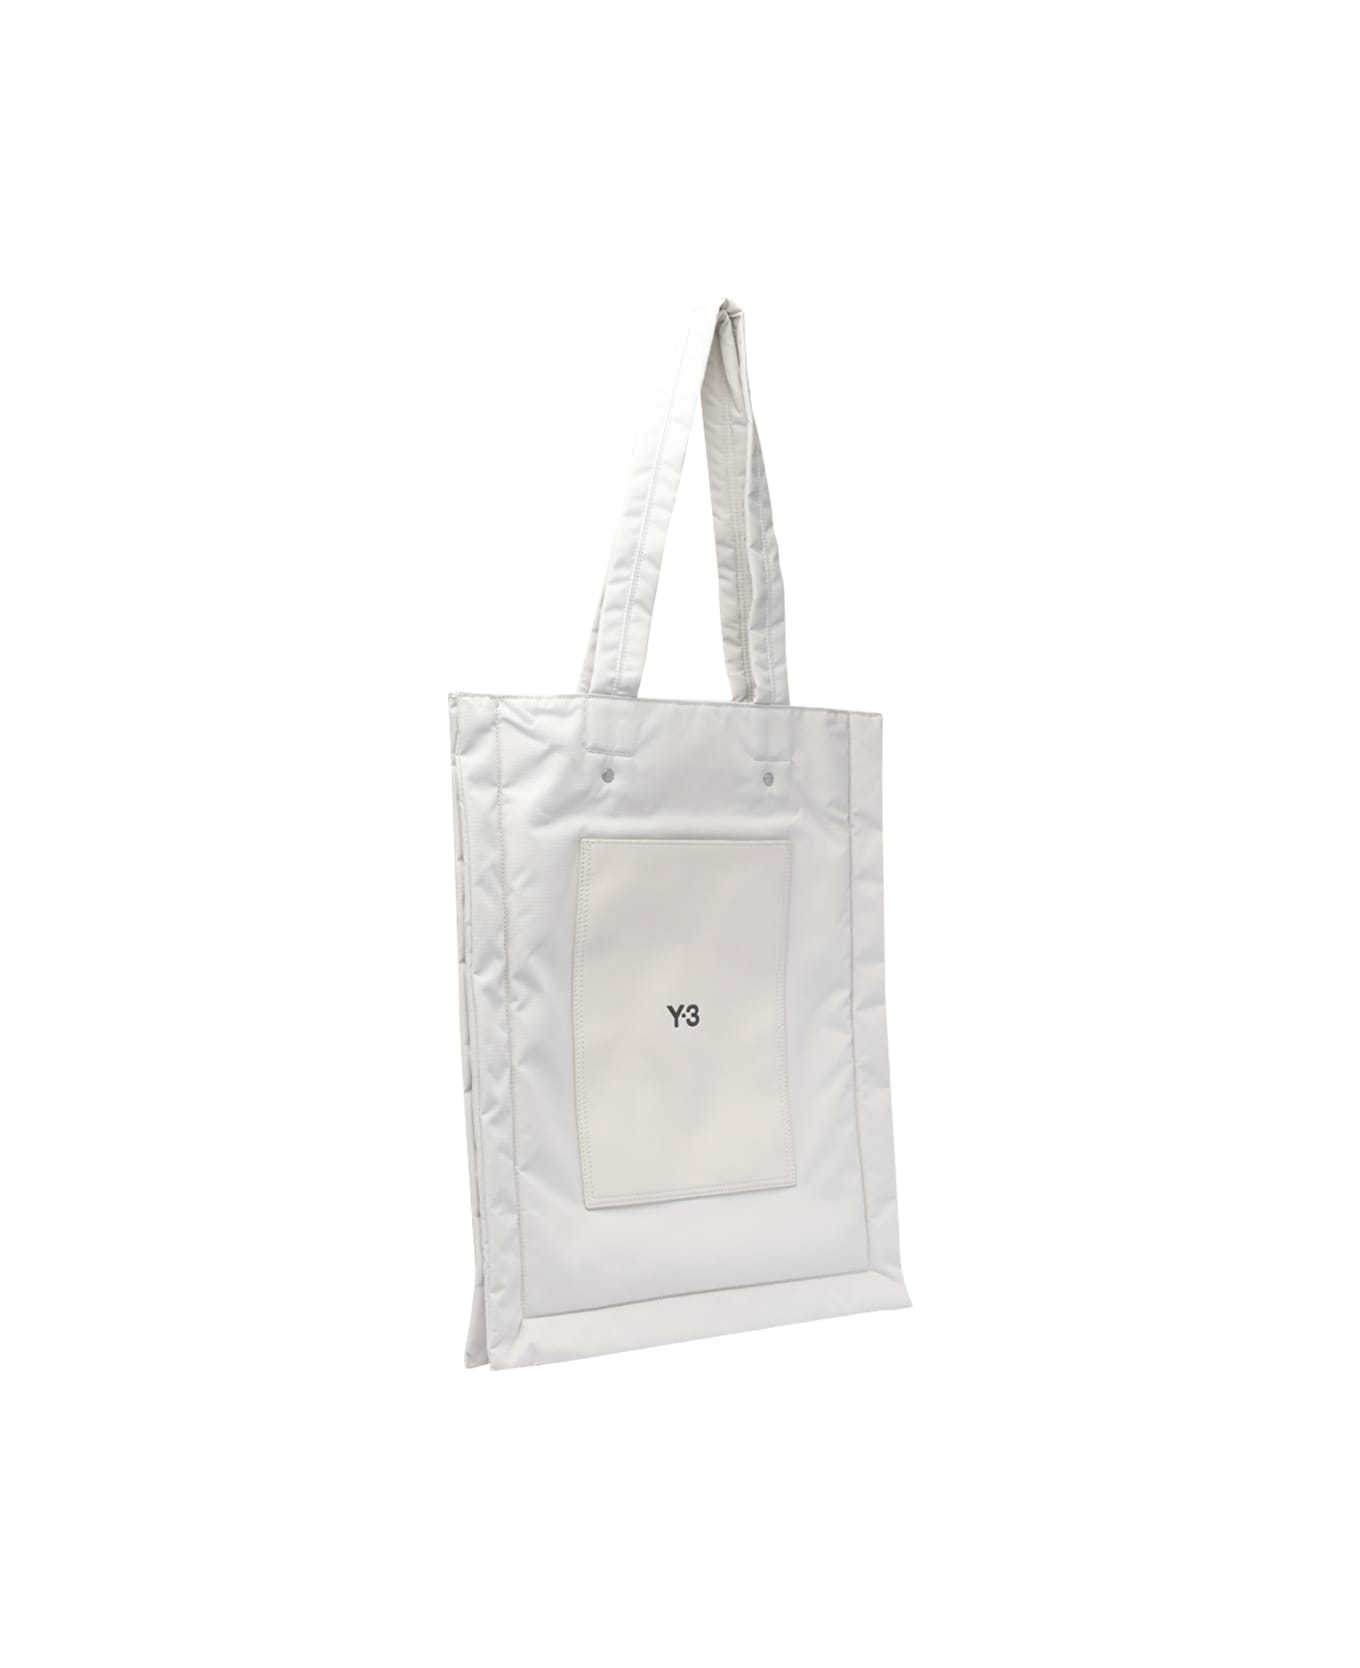 Y-3 Lux Tote Bag トートバッグ